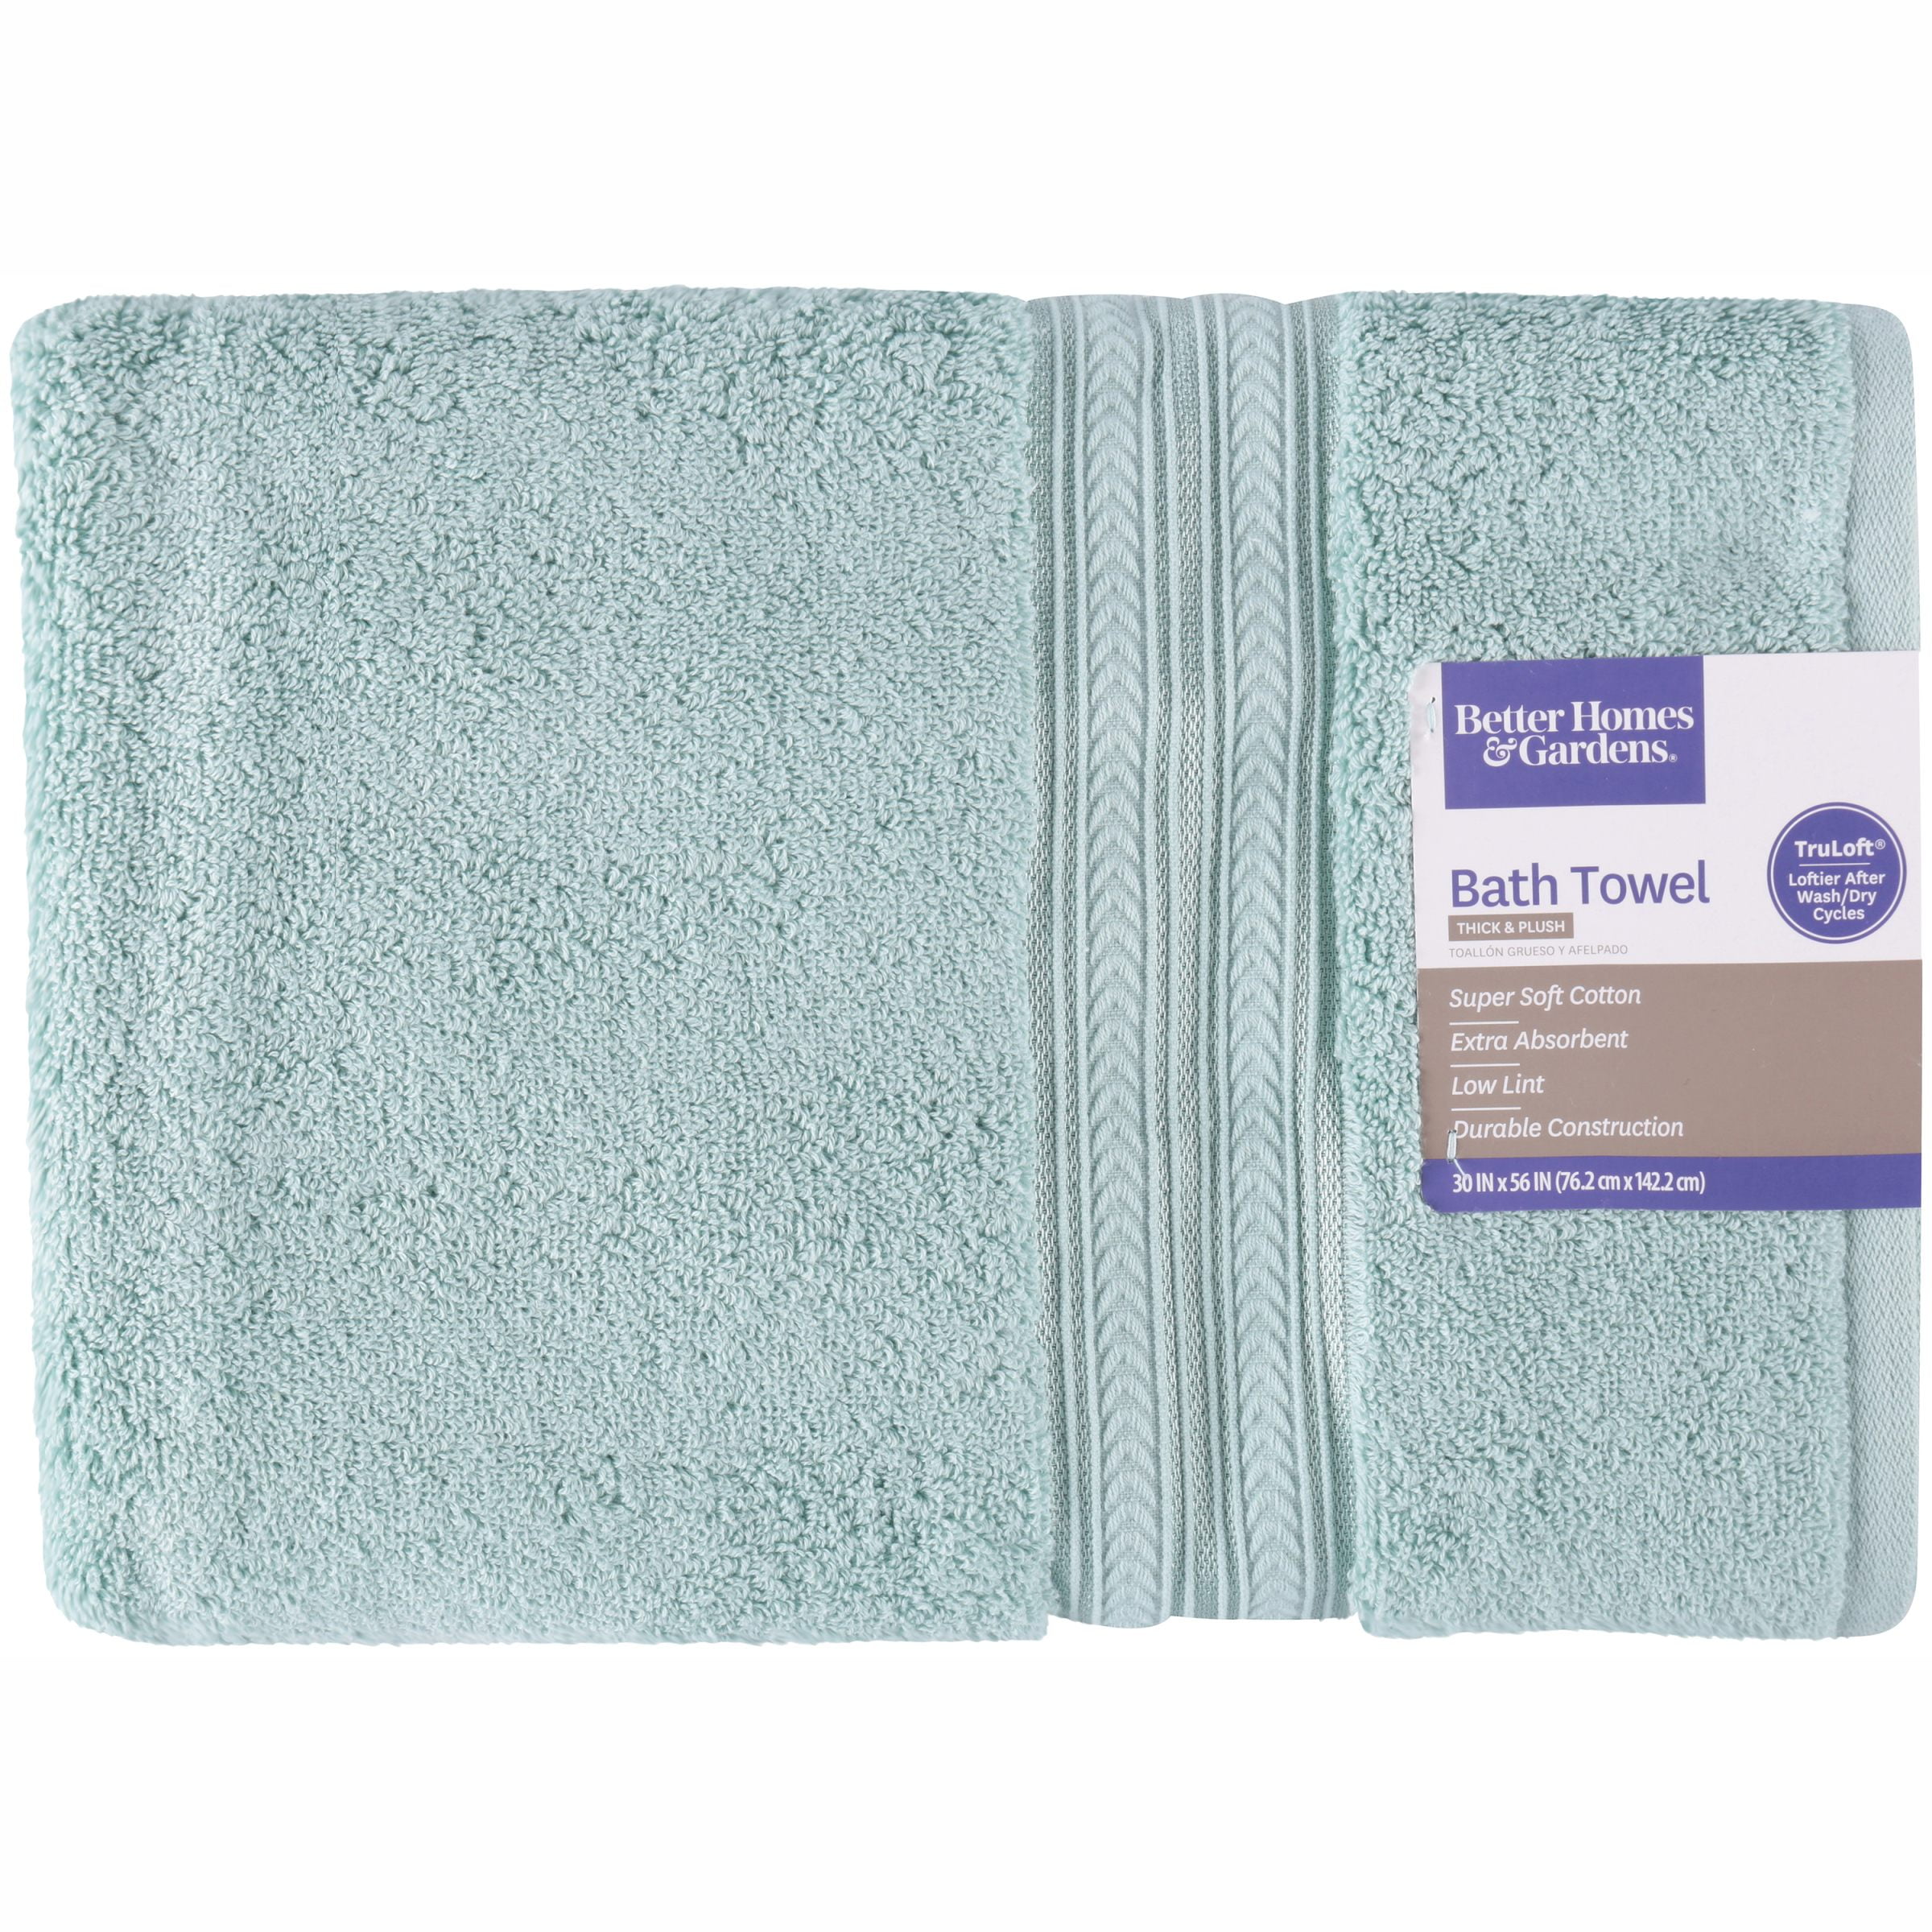 Aquifer /Arctic White Heathered 6 Piece Bath Towel Set, Better Homes &  Gardens Thick and Plush Towel Collection - Walmart.com